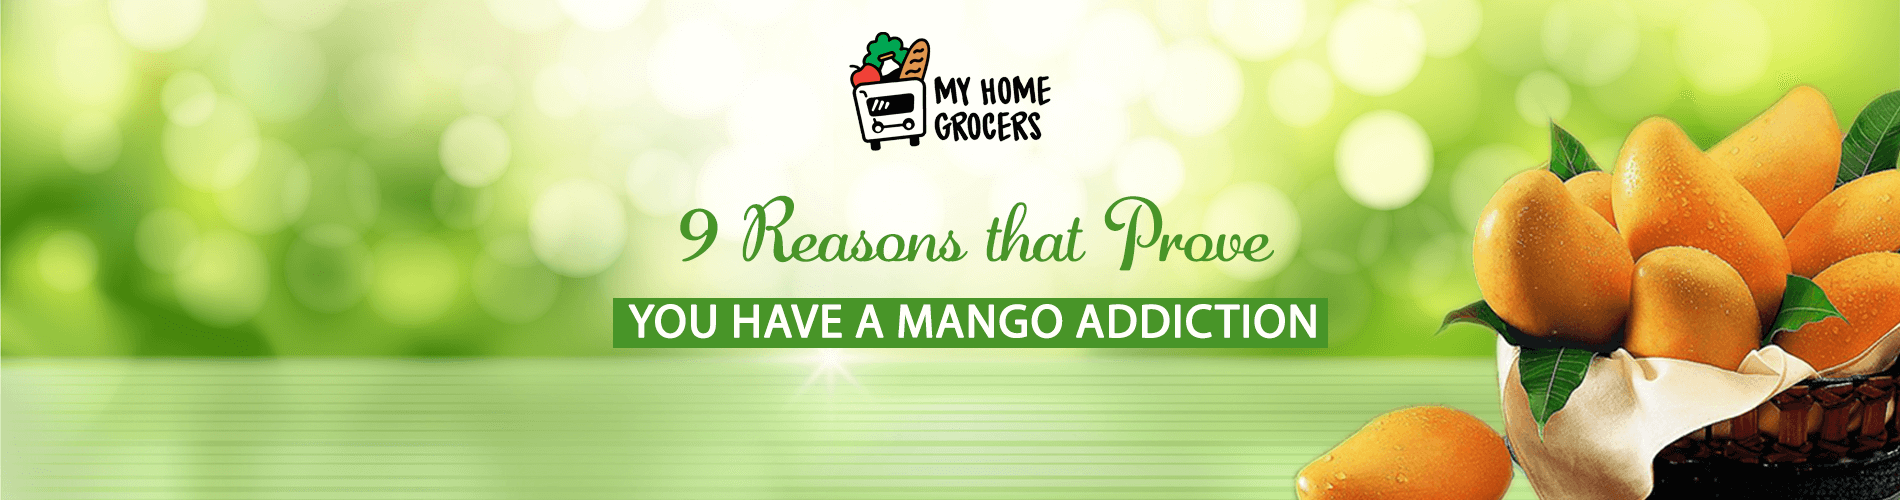 9 Reasons that Prove you have a Mango Addiction